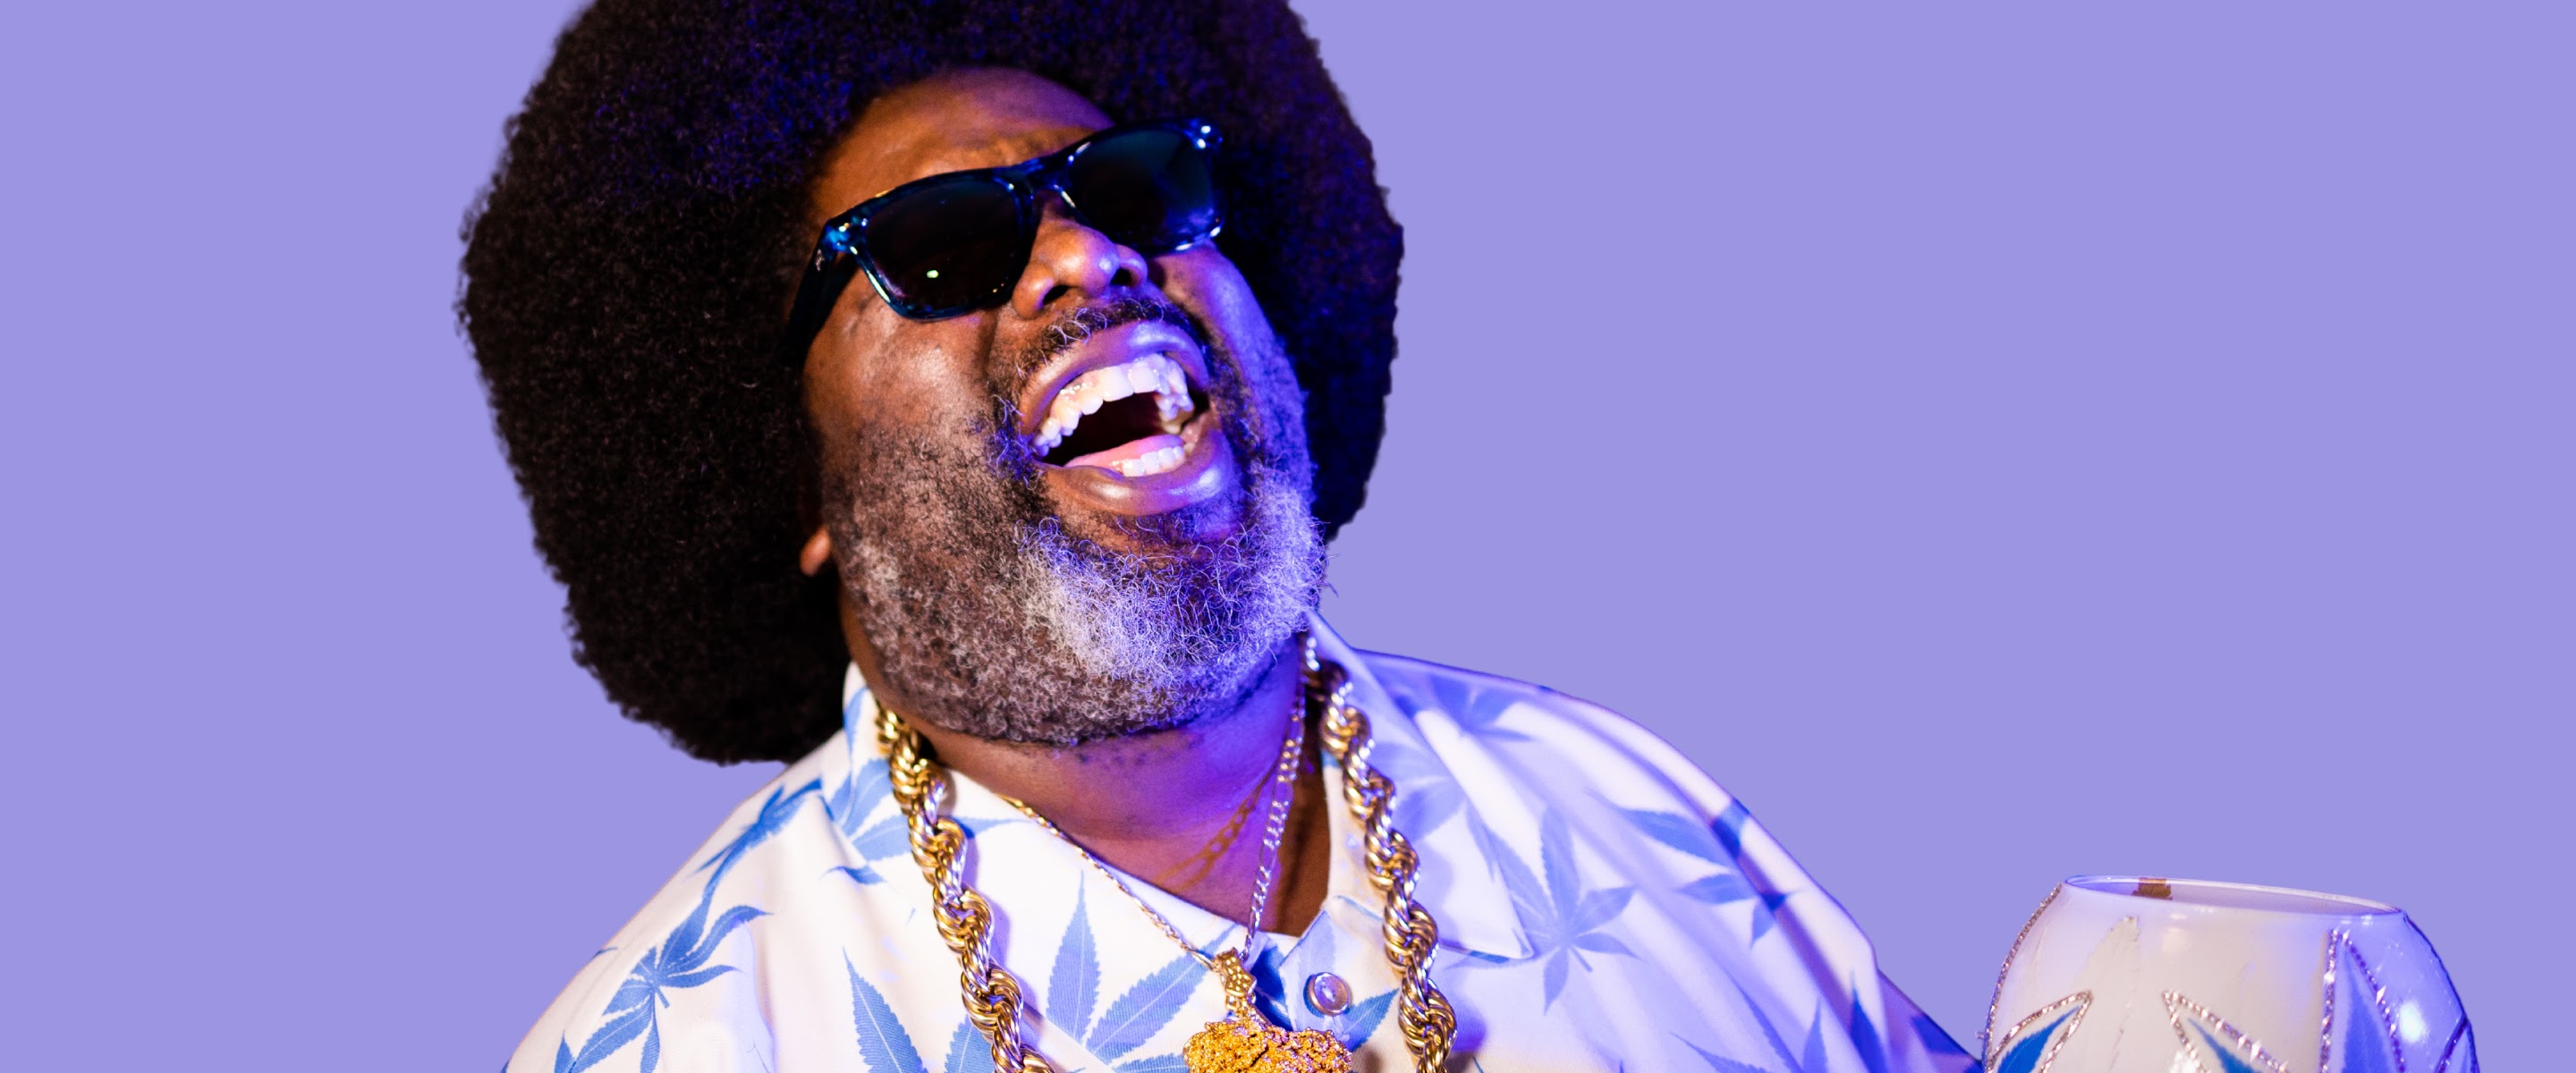 Afroman alive and kicking